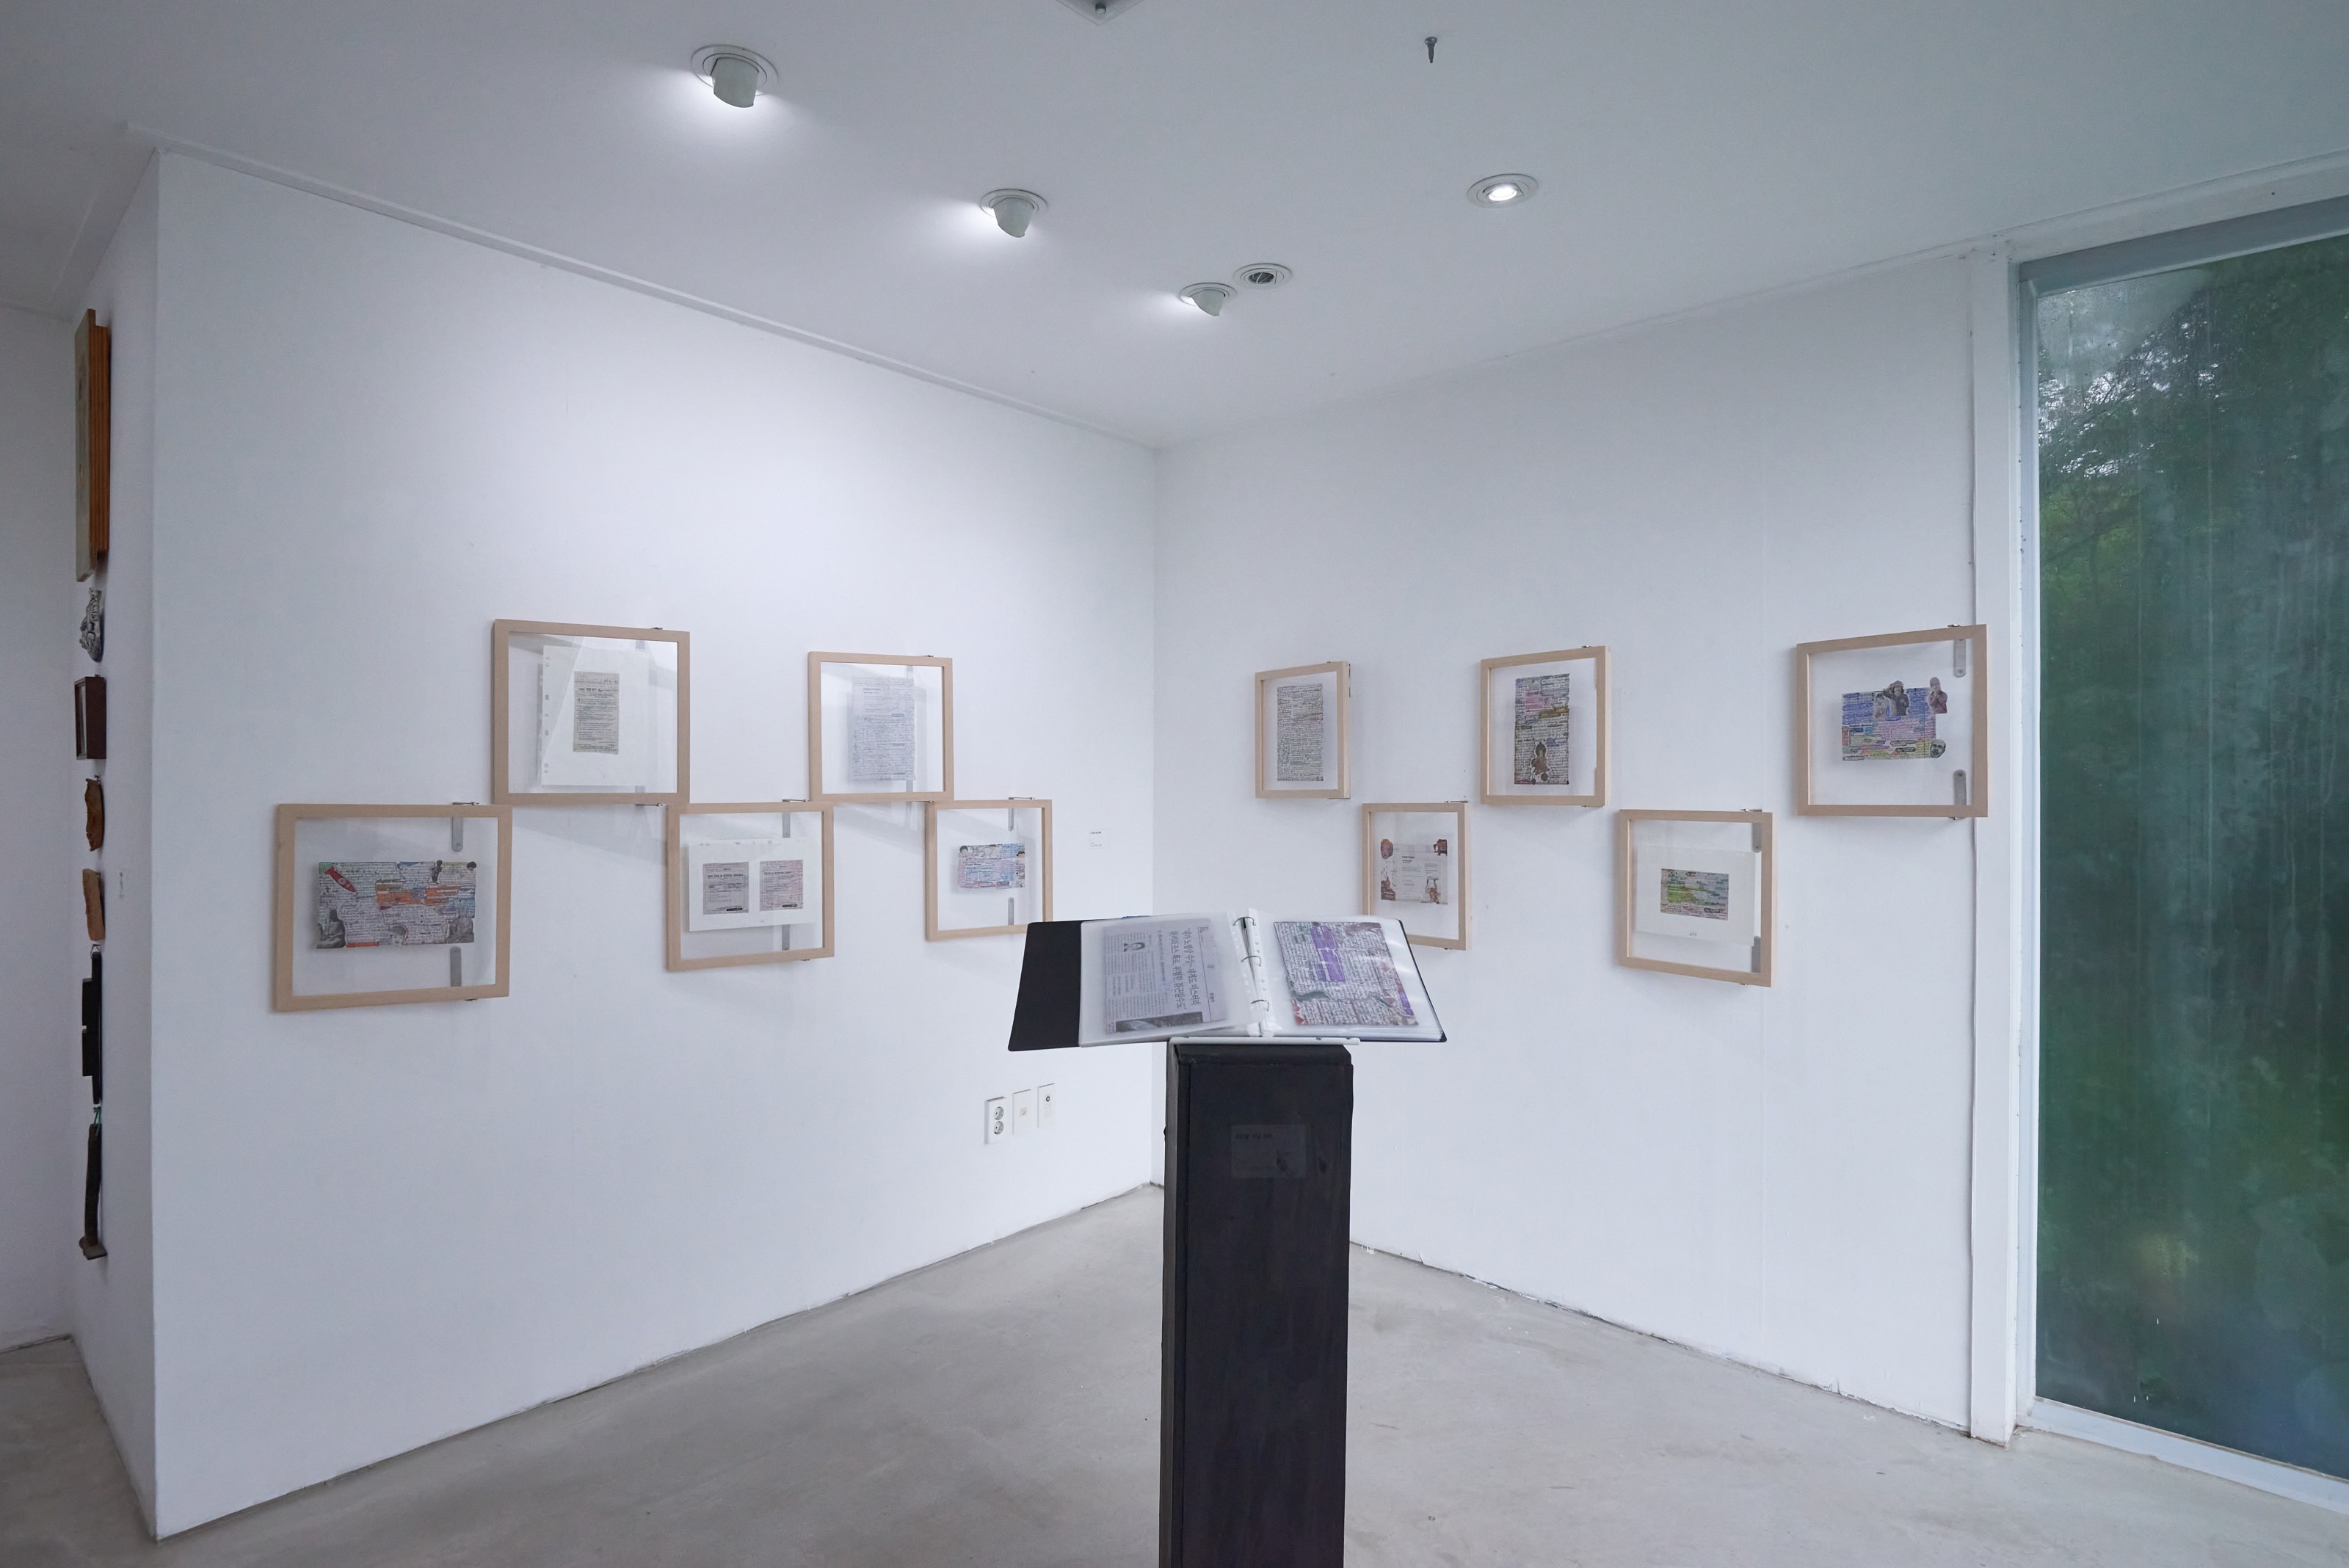 Chunk of Concept: The artistic meanderings of Sung Neung Kyung, Installation view